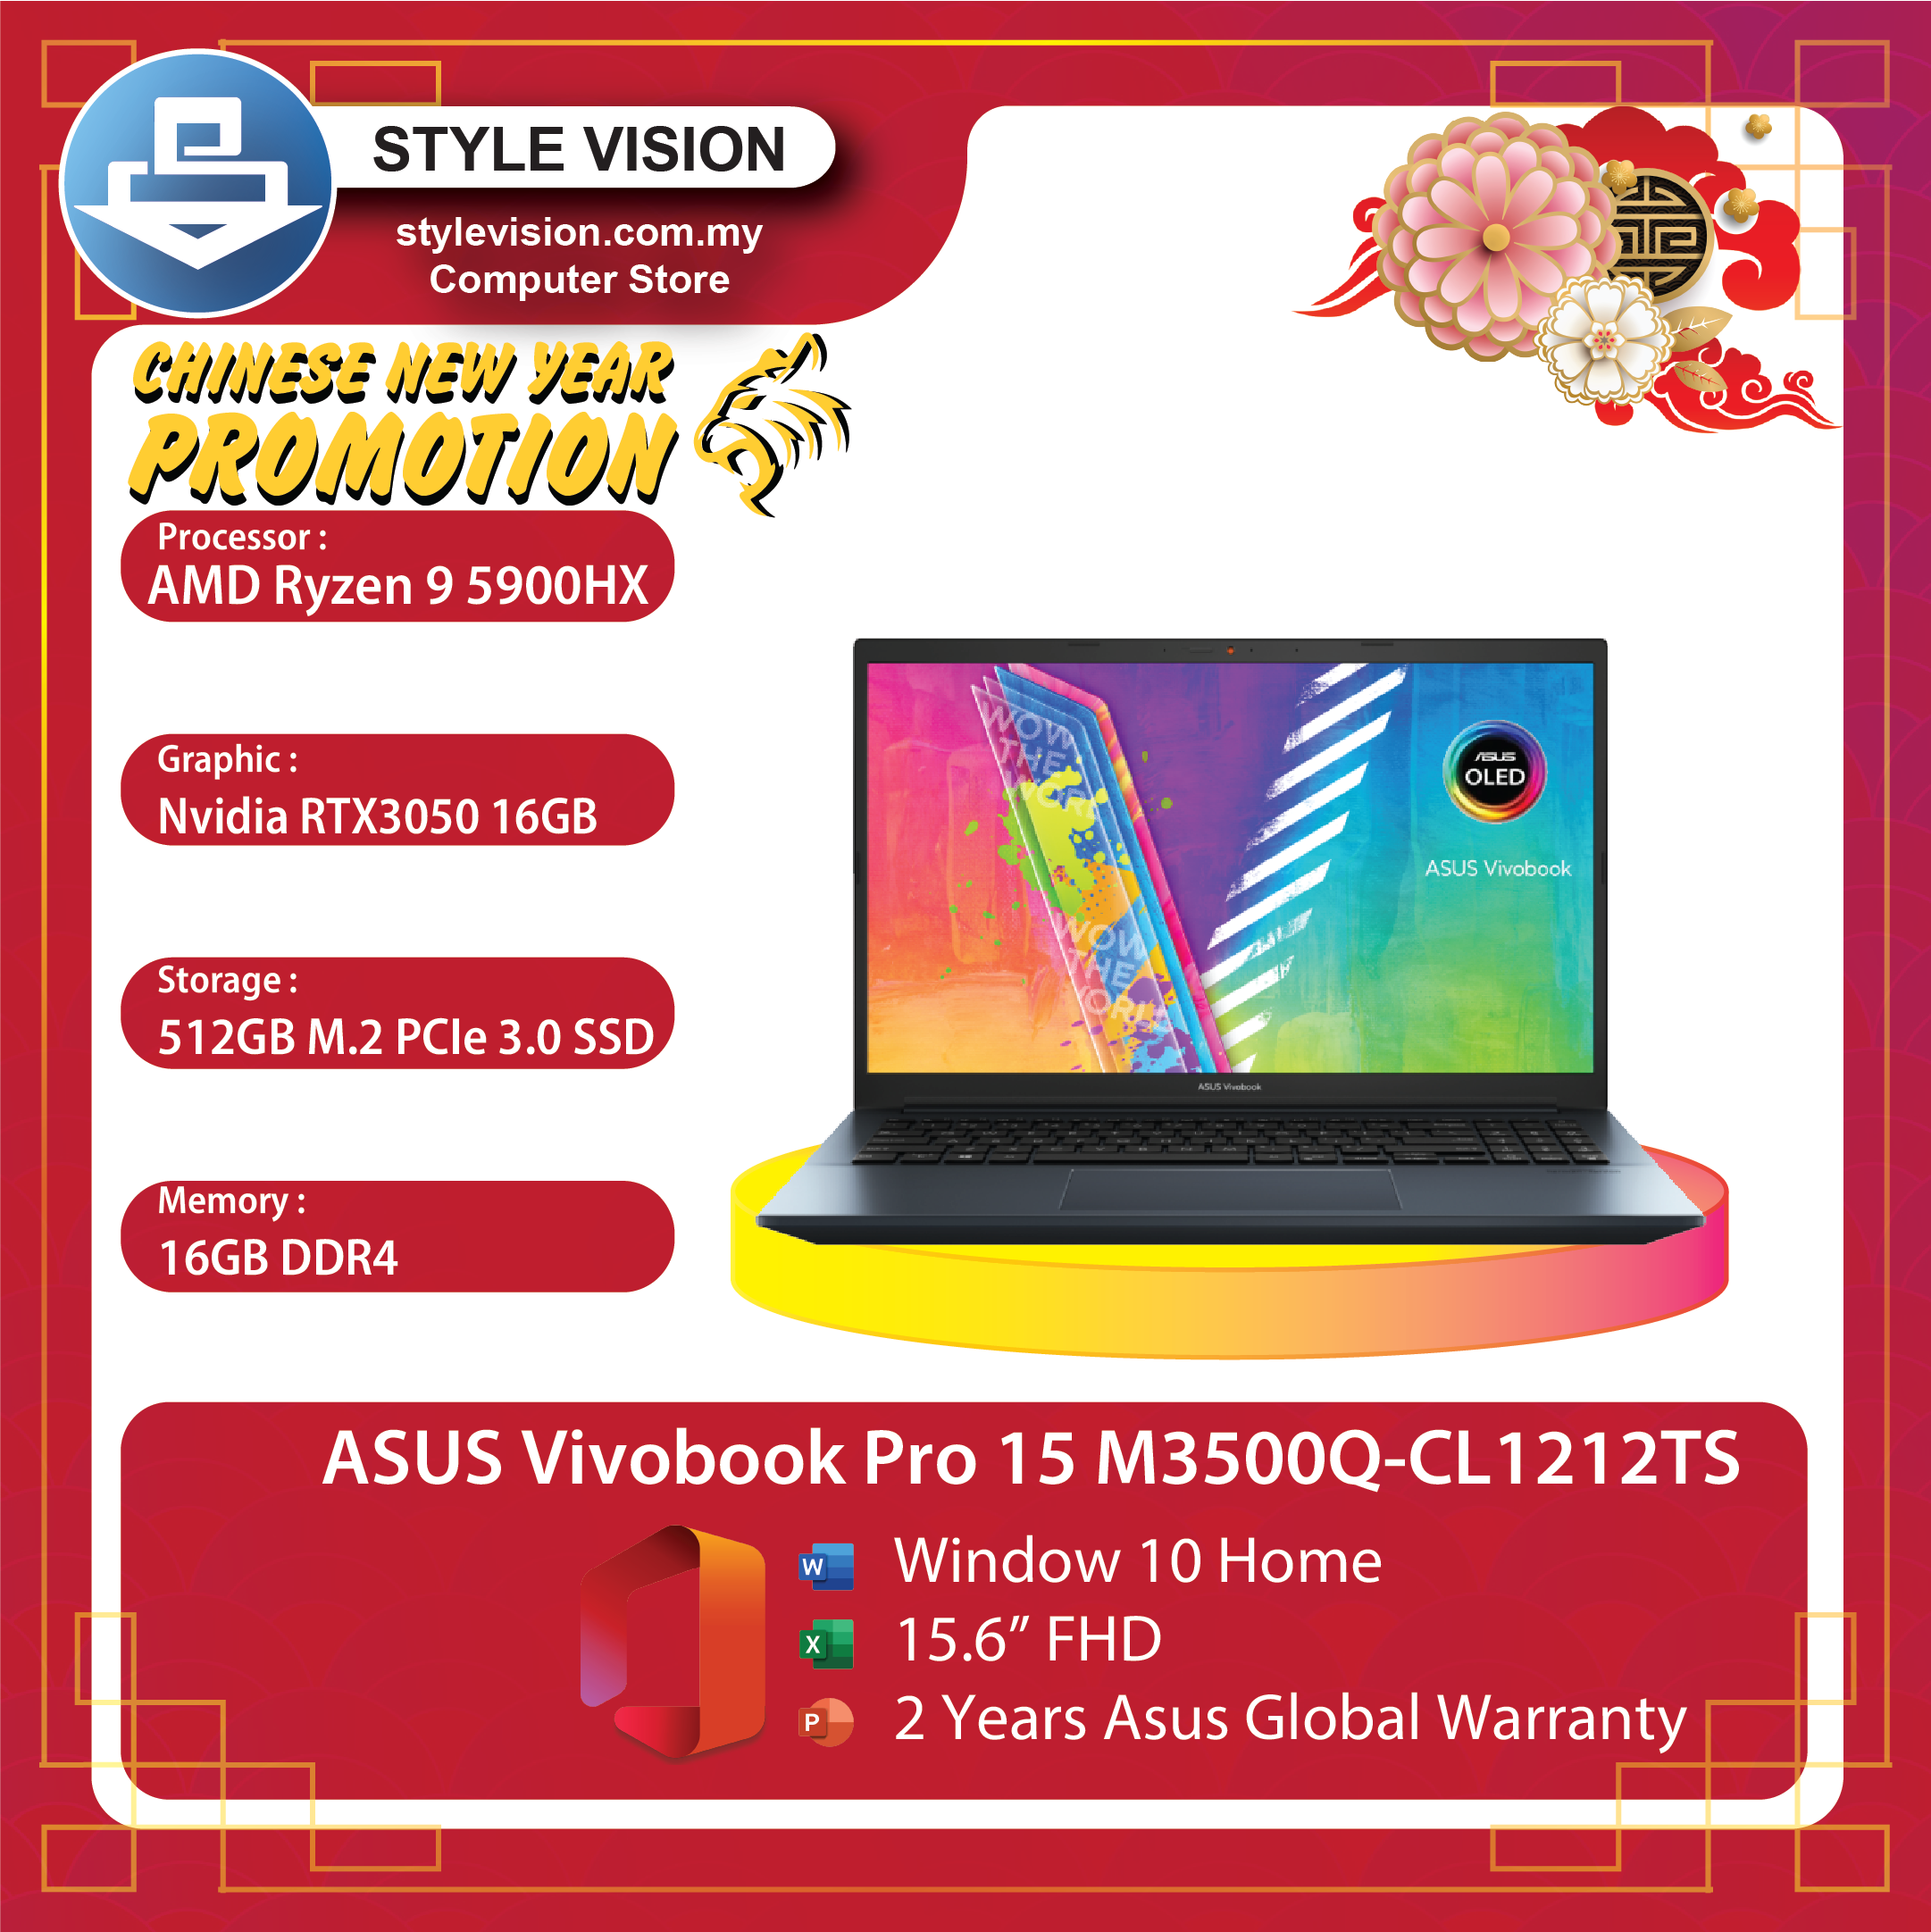 ASUS Vivobook Pro 15 M3500Q-CL1212TS,R9-5900HX/16GB DDR4/512GB  SSD/RTX3050/15.6"FHD OLED/Window10/OPI/2Y International Carry-in &1st Y  Accidental Protect/QUIET BLUE Notebook – Style Vision Computer Store